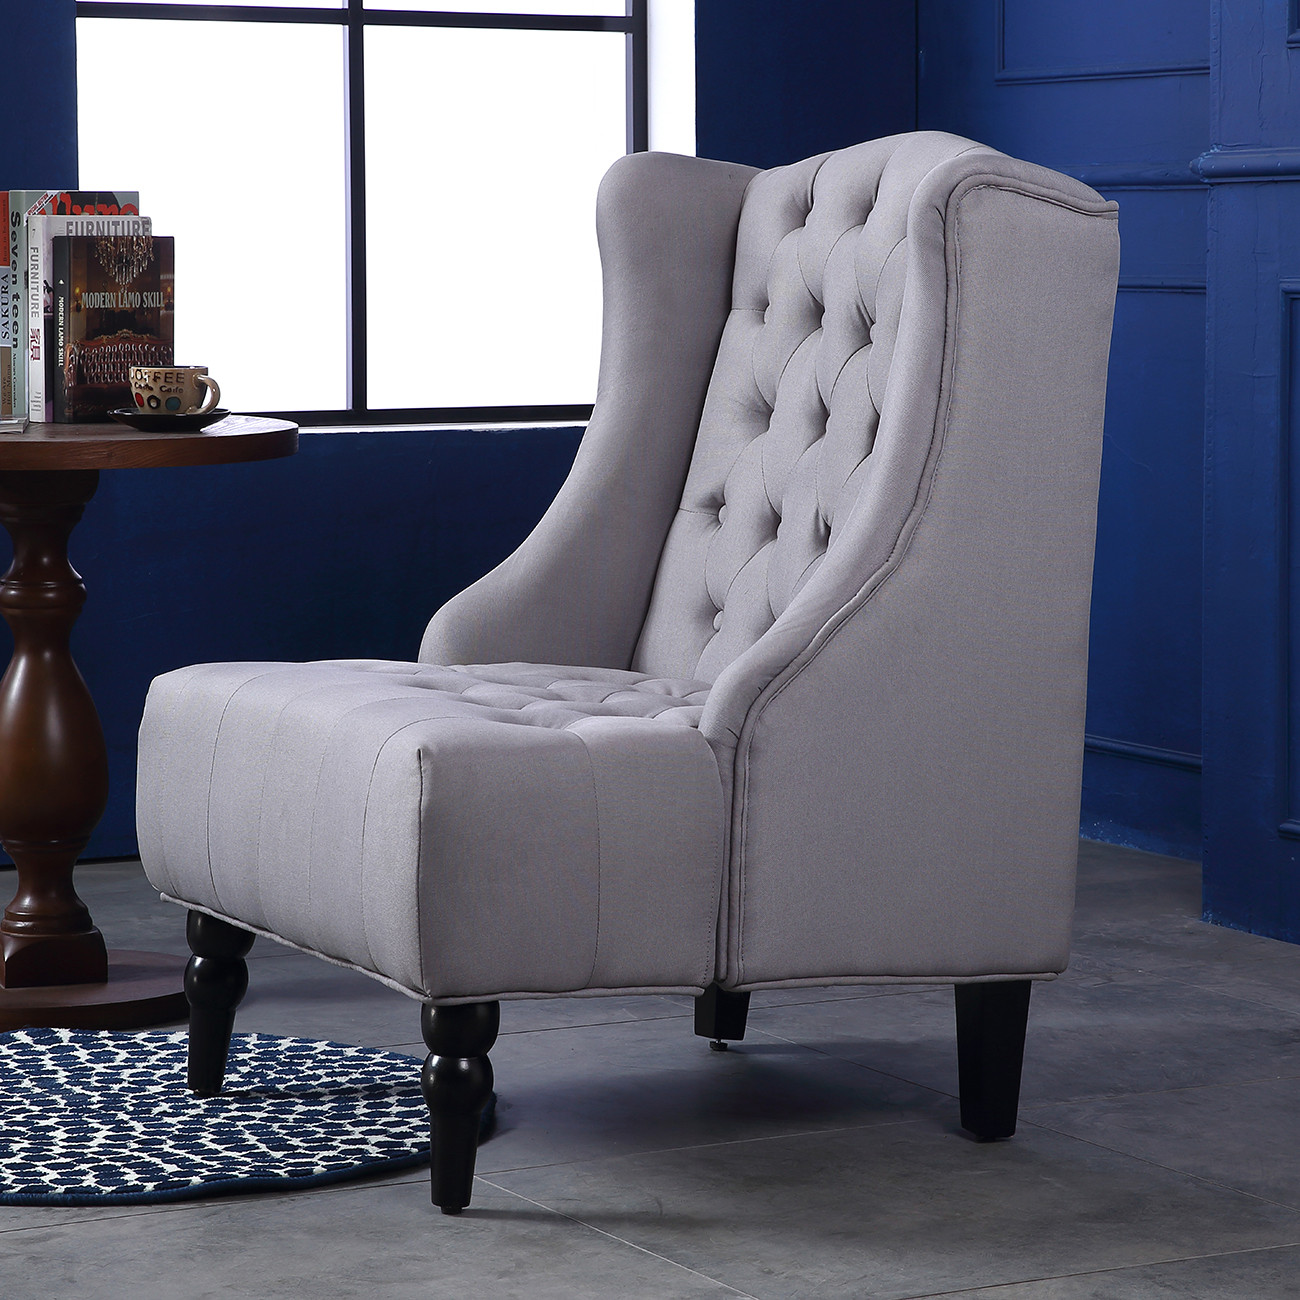 High Back Living Room Chair
 Wingback Accent Chair Tall High back Living Room Tufted